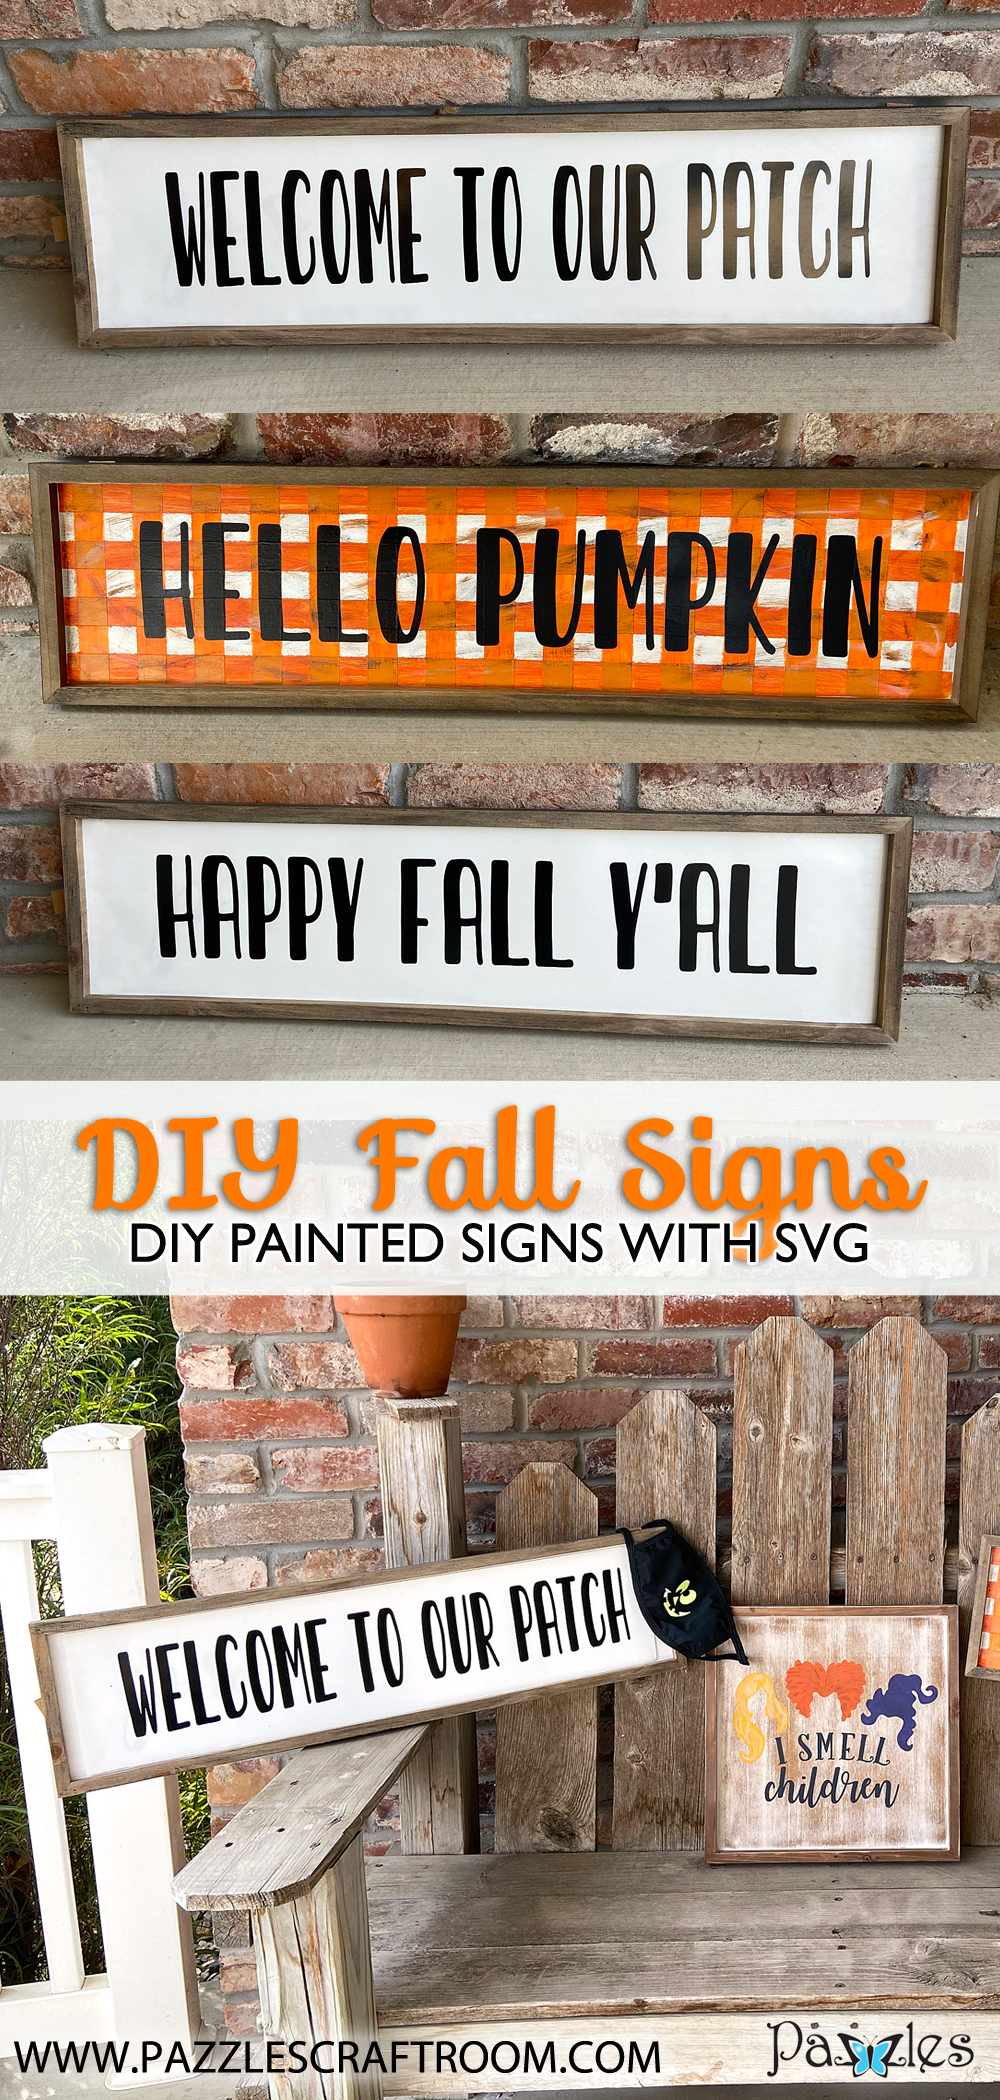 Pazzles DIY Fall Welcome Signs with instant SVG download. Compatible with all major electronic cutters including Pazzles Inspiration, Cricut, and Silhouette Cameo. Design by Sara Weber.